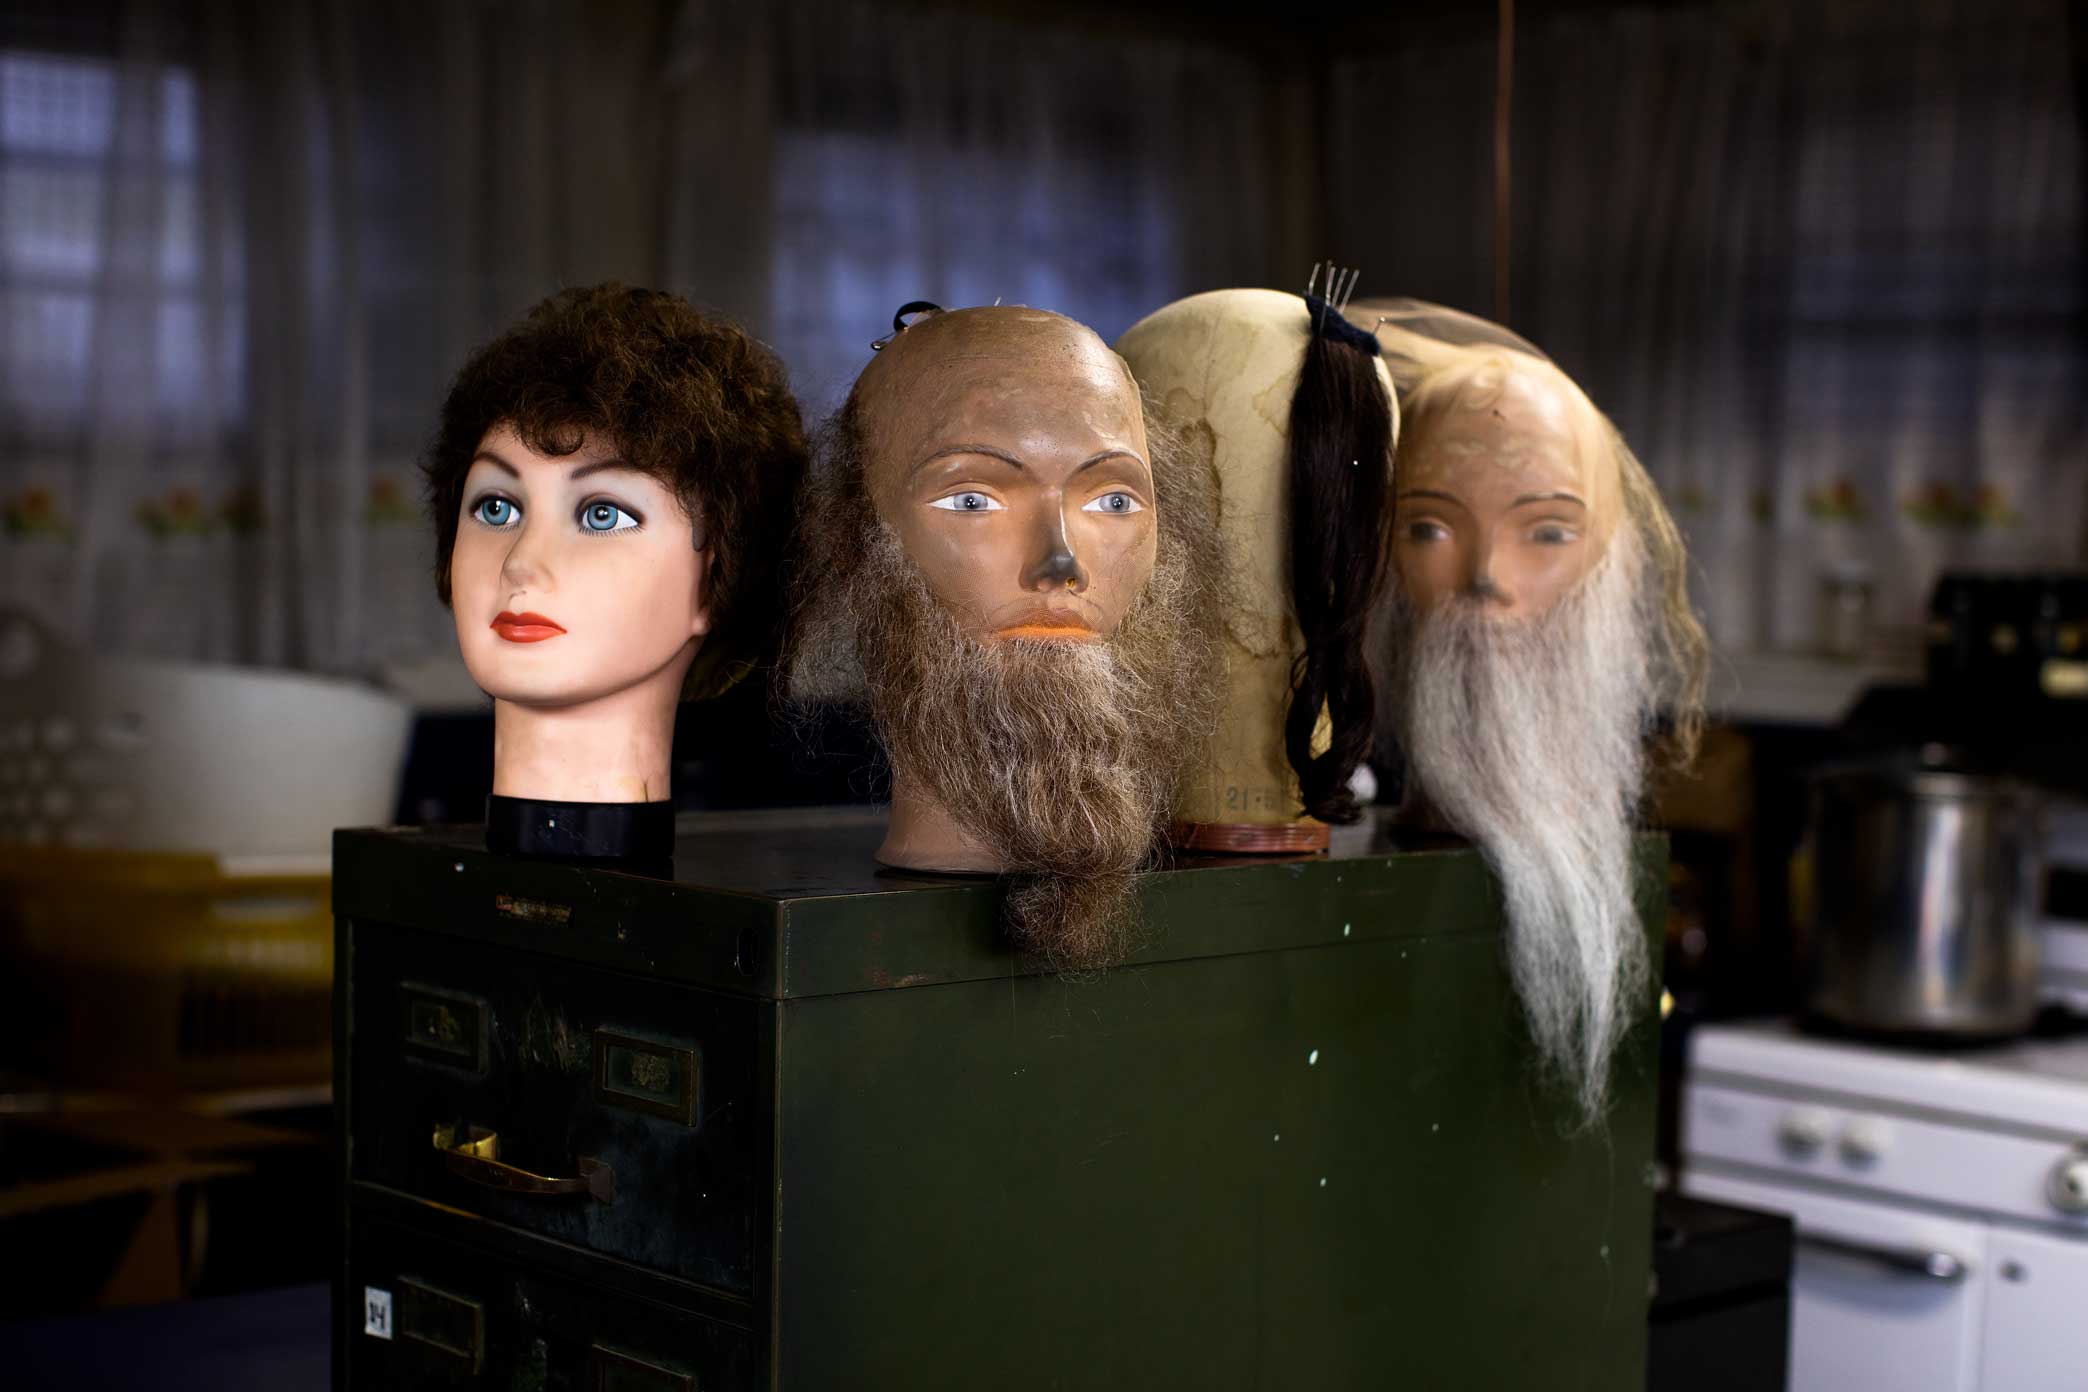  &nbsp;A Collection of head manikins at Claire Grunwald basement Wig Studio in Brooklyn. Claire Grunwald is the owner of Claire Accuhair, a Brooklyn wigs company that for fill customers orders by hand with authentic hair. The Orthodox community make 